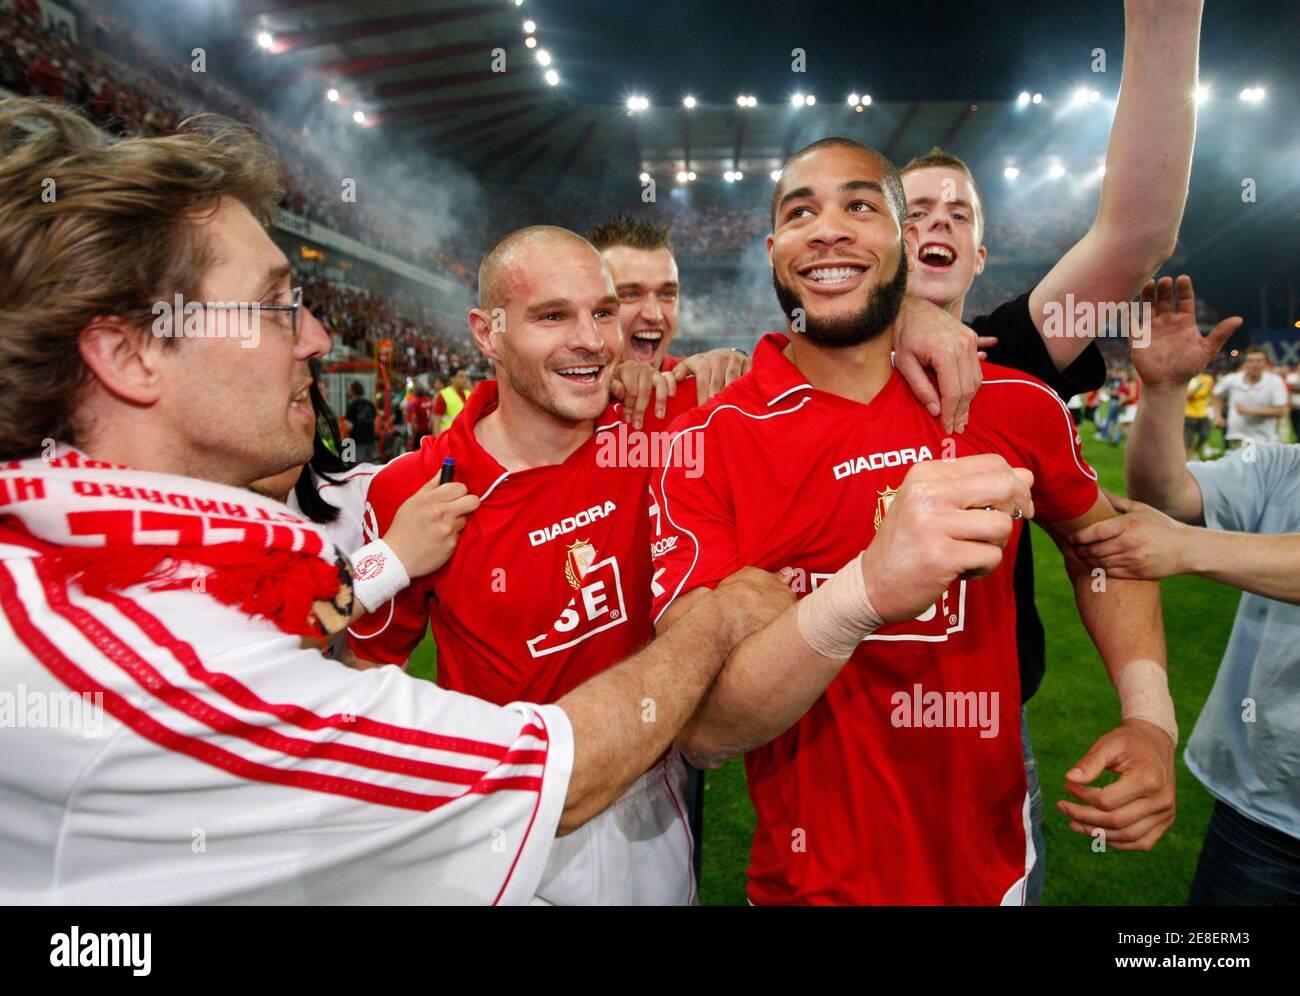 Standard Liege's Gucci Onyewu (R) celebrates with team mates after winning  the Belgian championship, after defeating Anderlecht in the second leg of  the Belgian soccer first division title playoff at the Sclessin